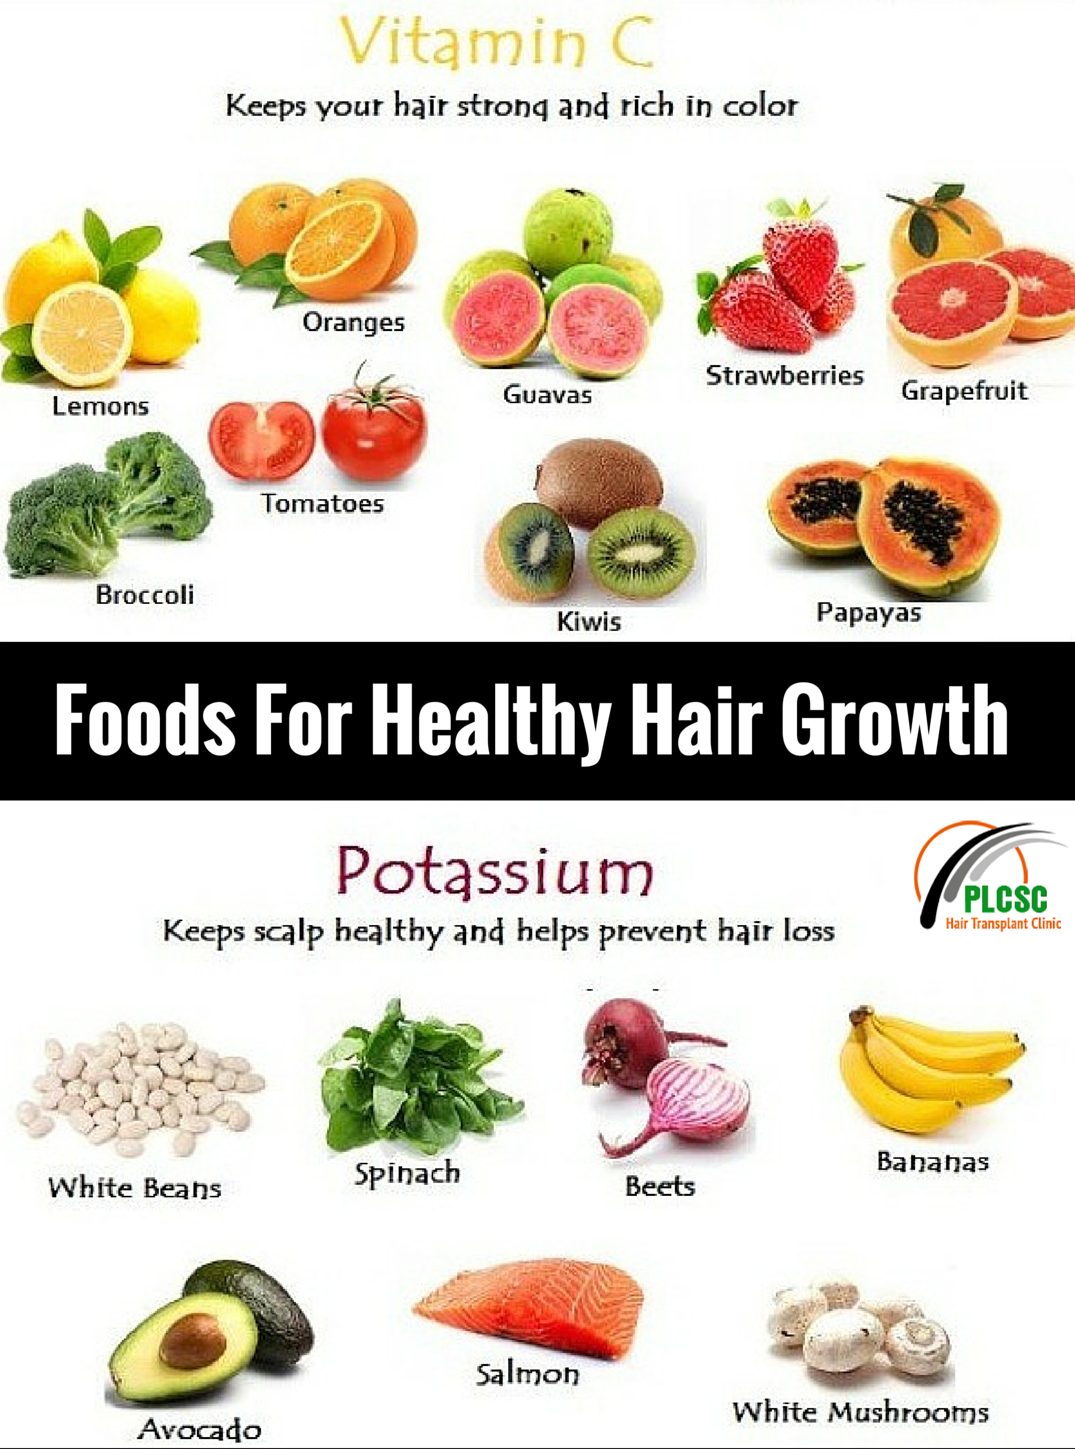 Here are some foods that can help prevent hair loss. Take care. # ...